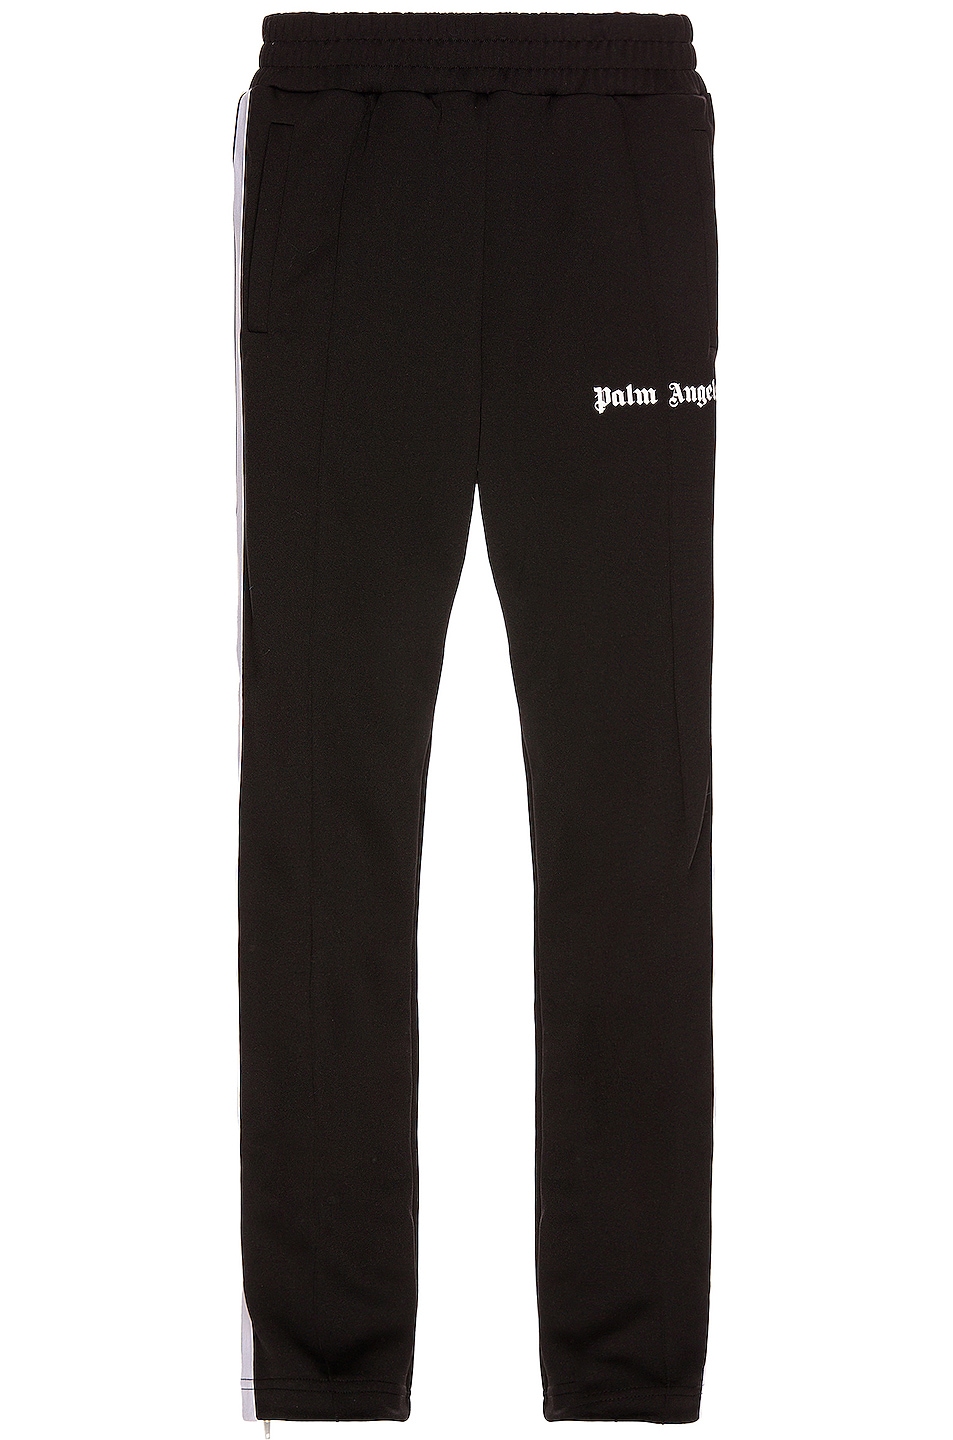 Image 1 of Palm Angels Classic Track Pants Skinny in Black & White